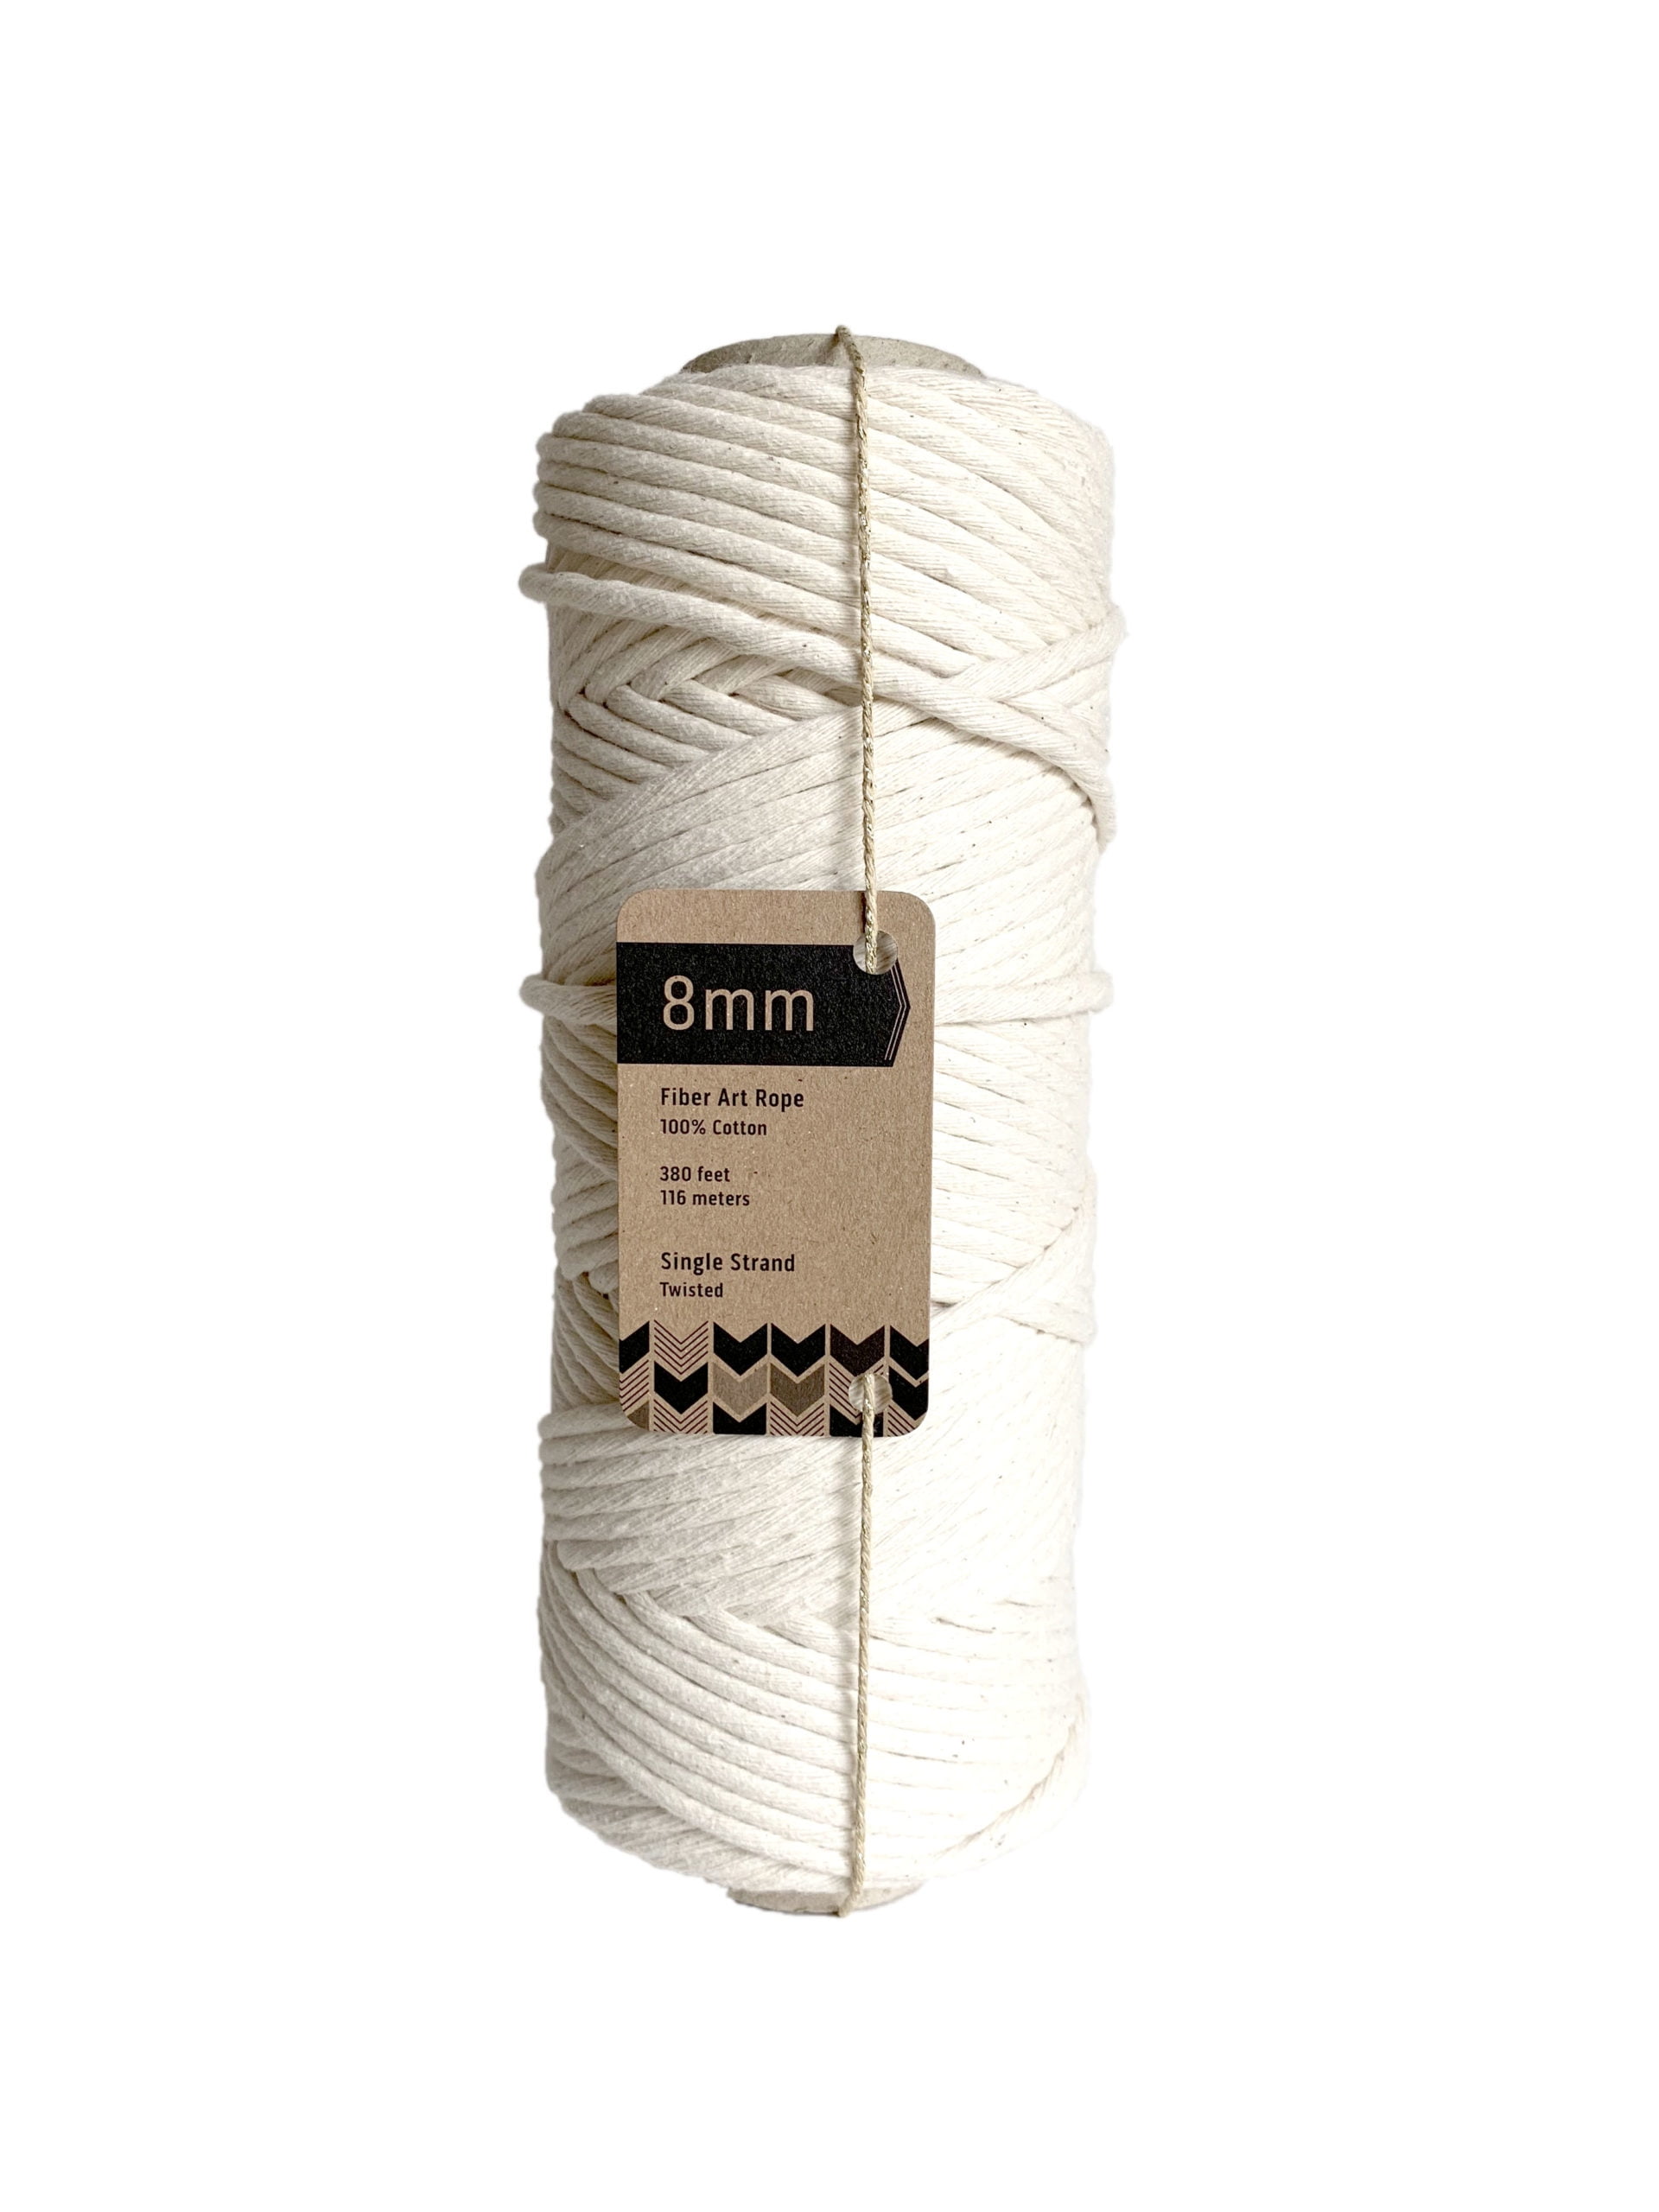 39FT 12mm Macrame Rope 3 Strand Natural Cotton Twisted Cord DIY Handcraft String 